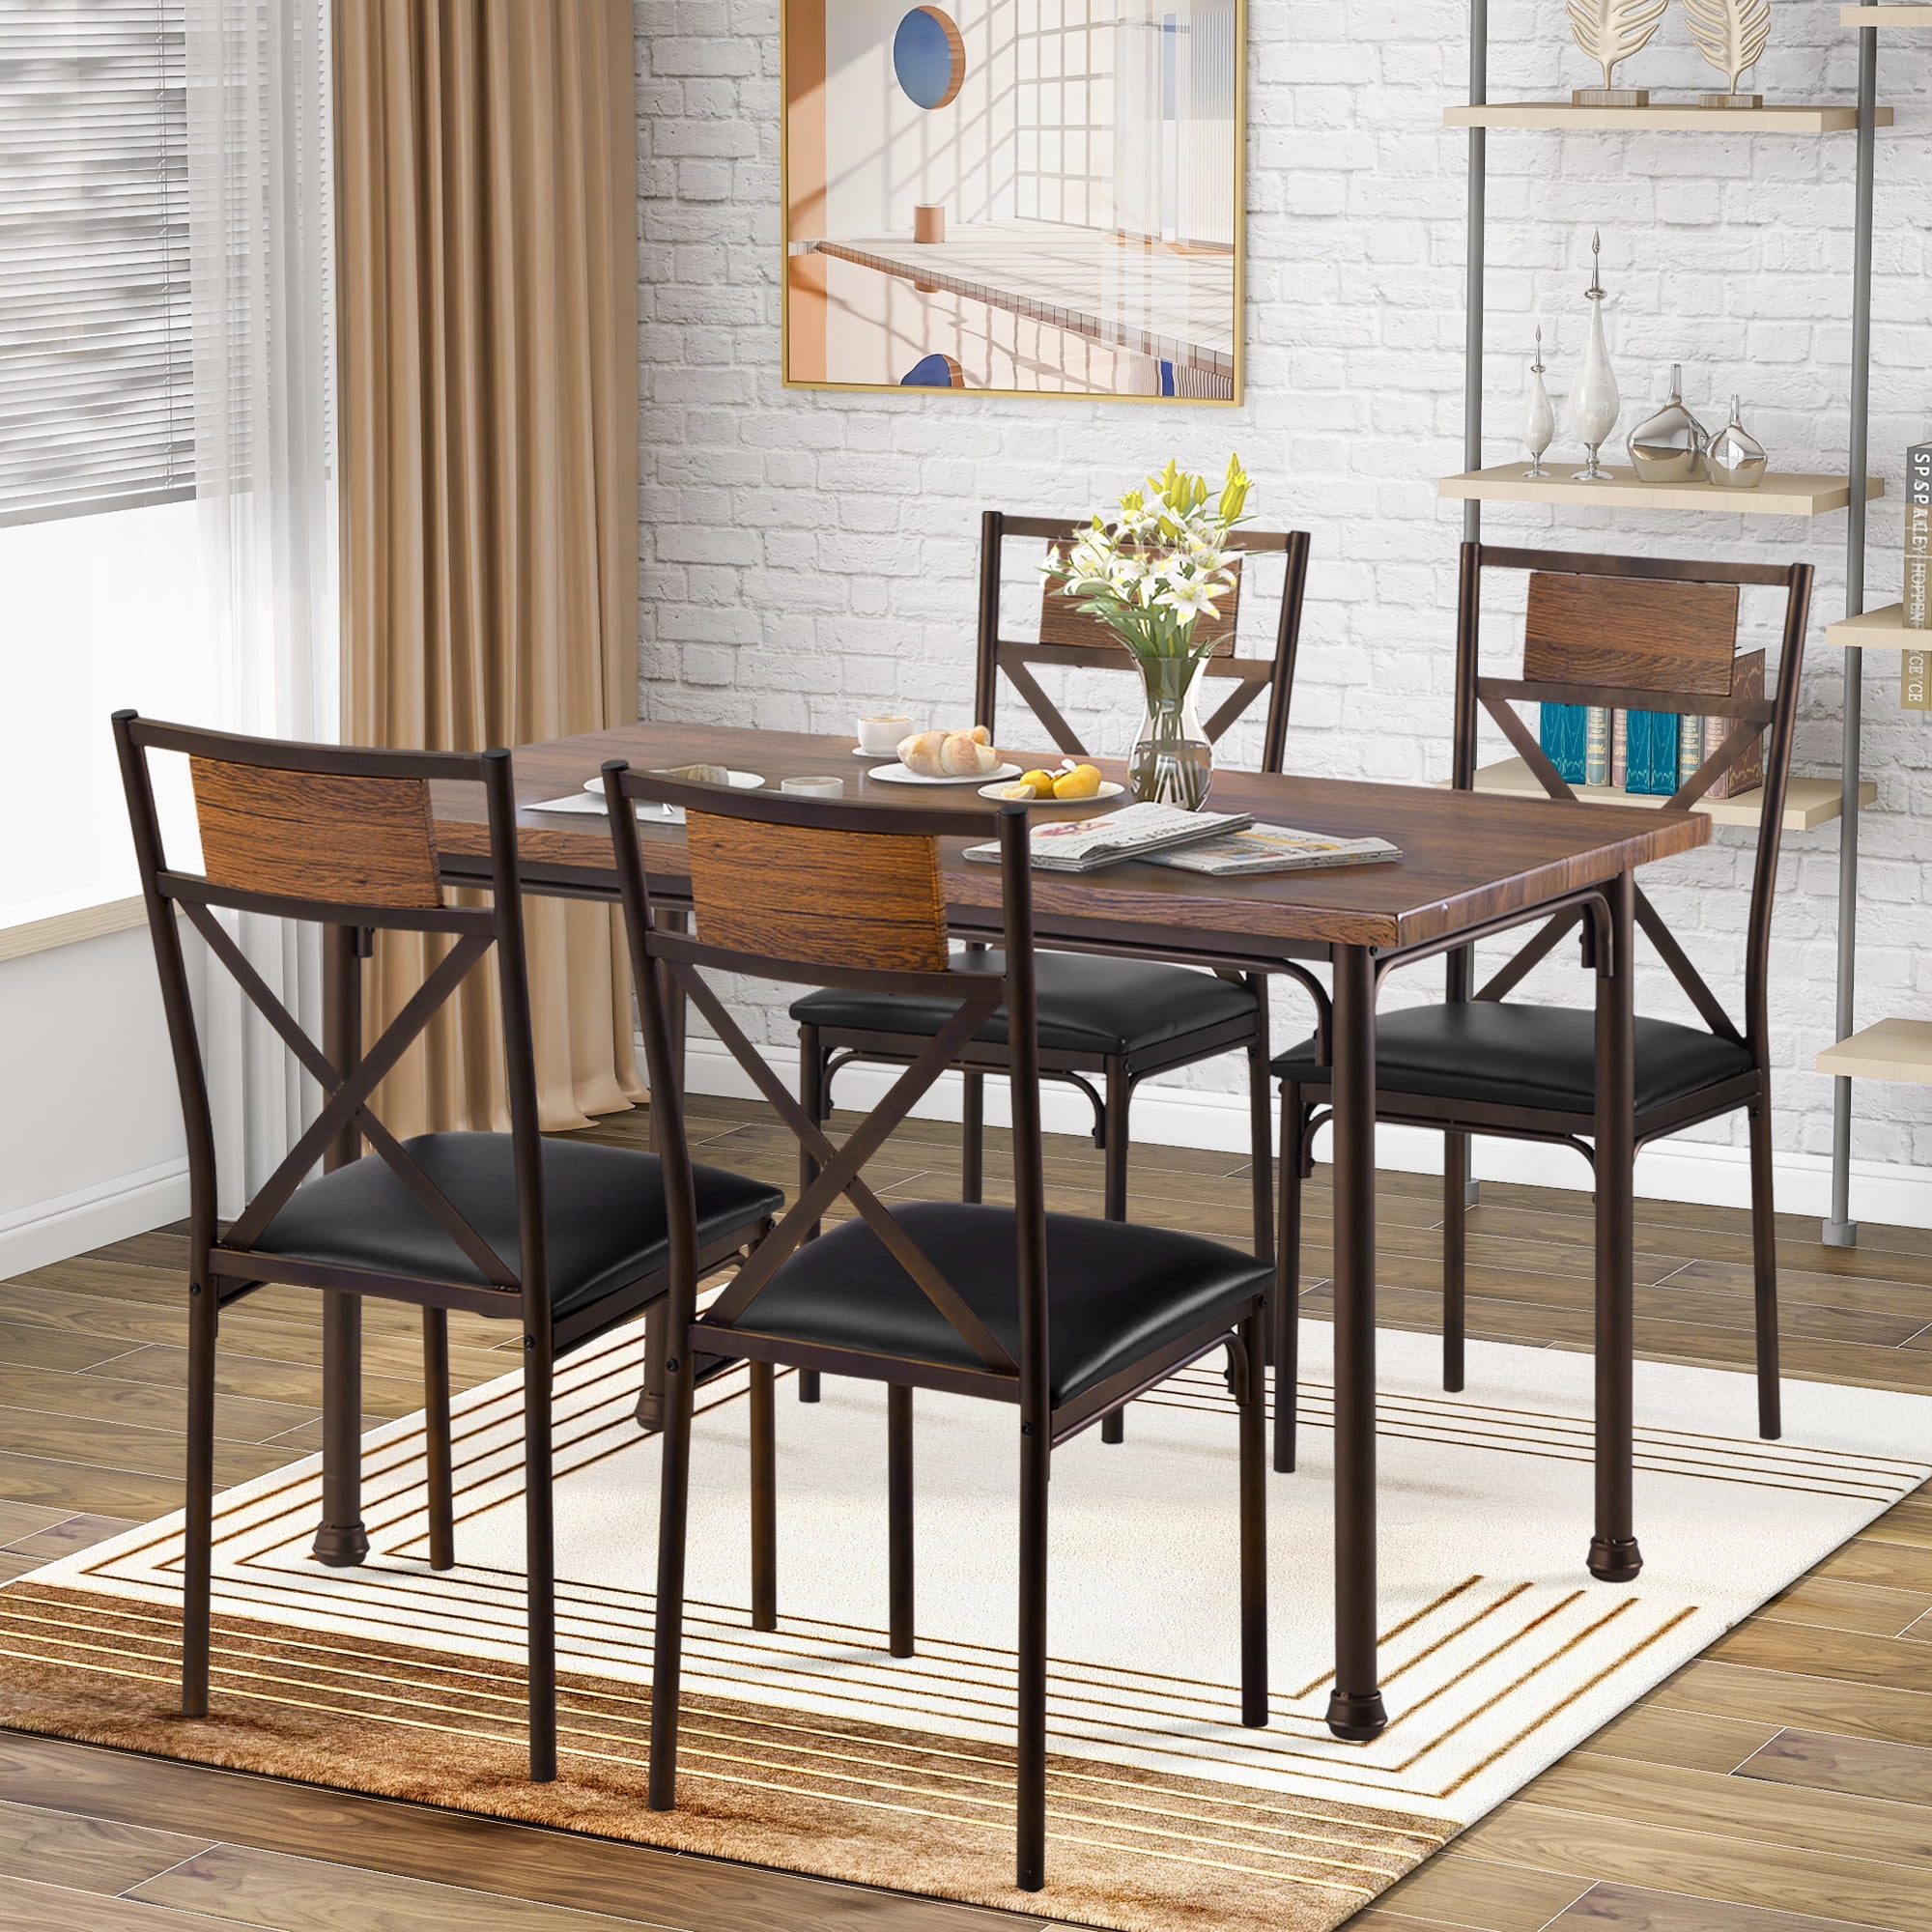 5 Piece Dining Room Table Set Compact, Small Dining Room Sets For 4